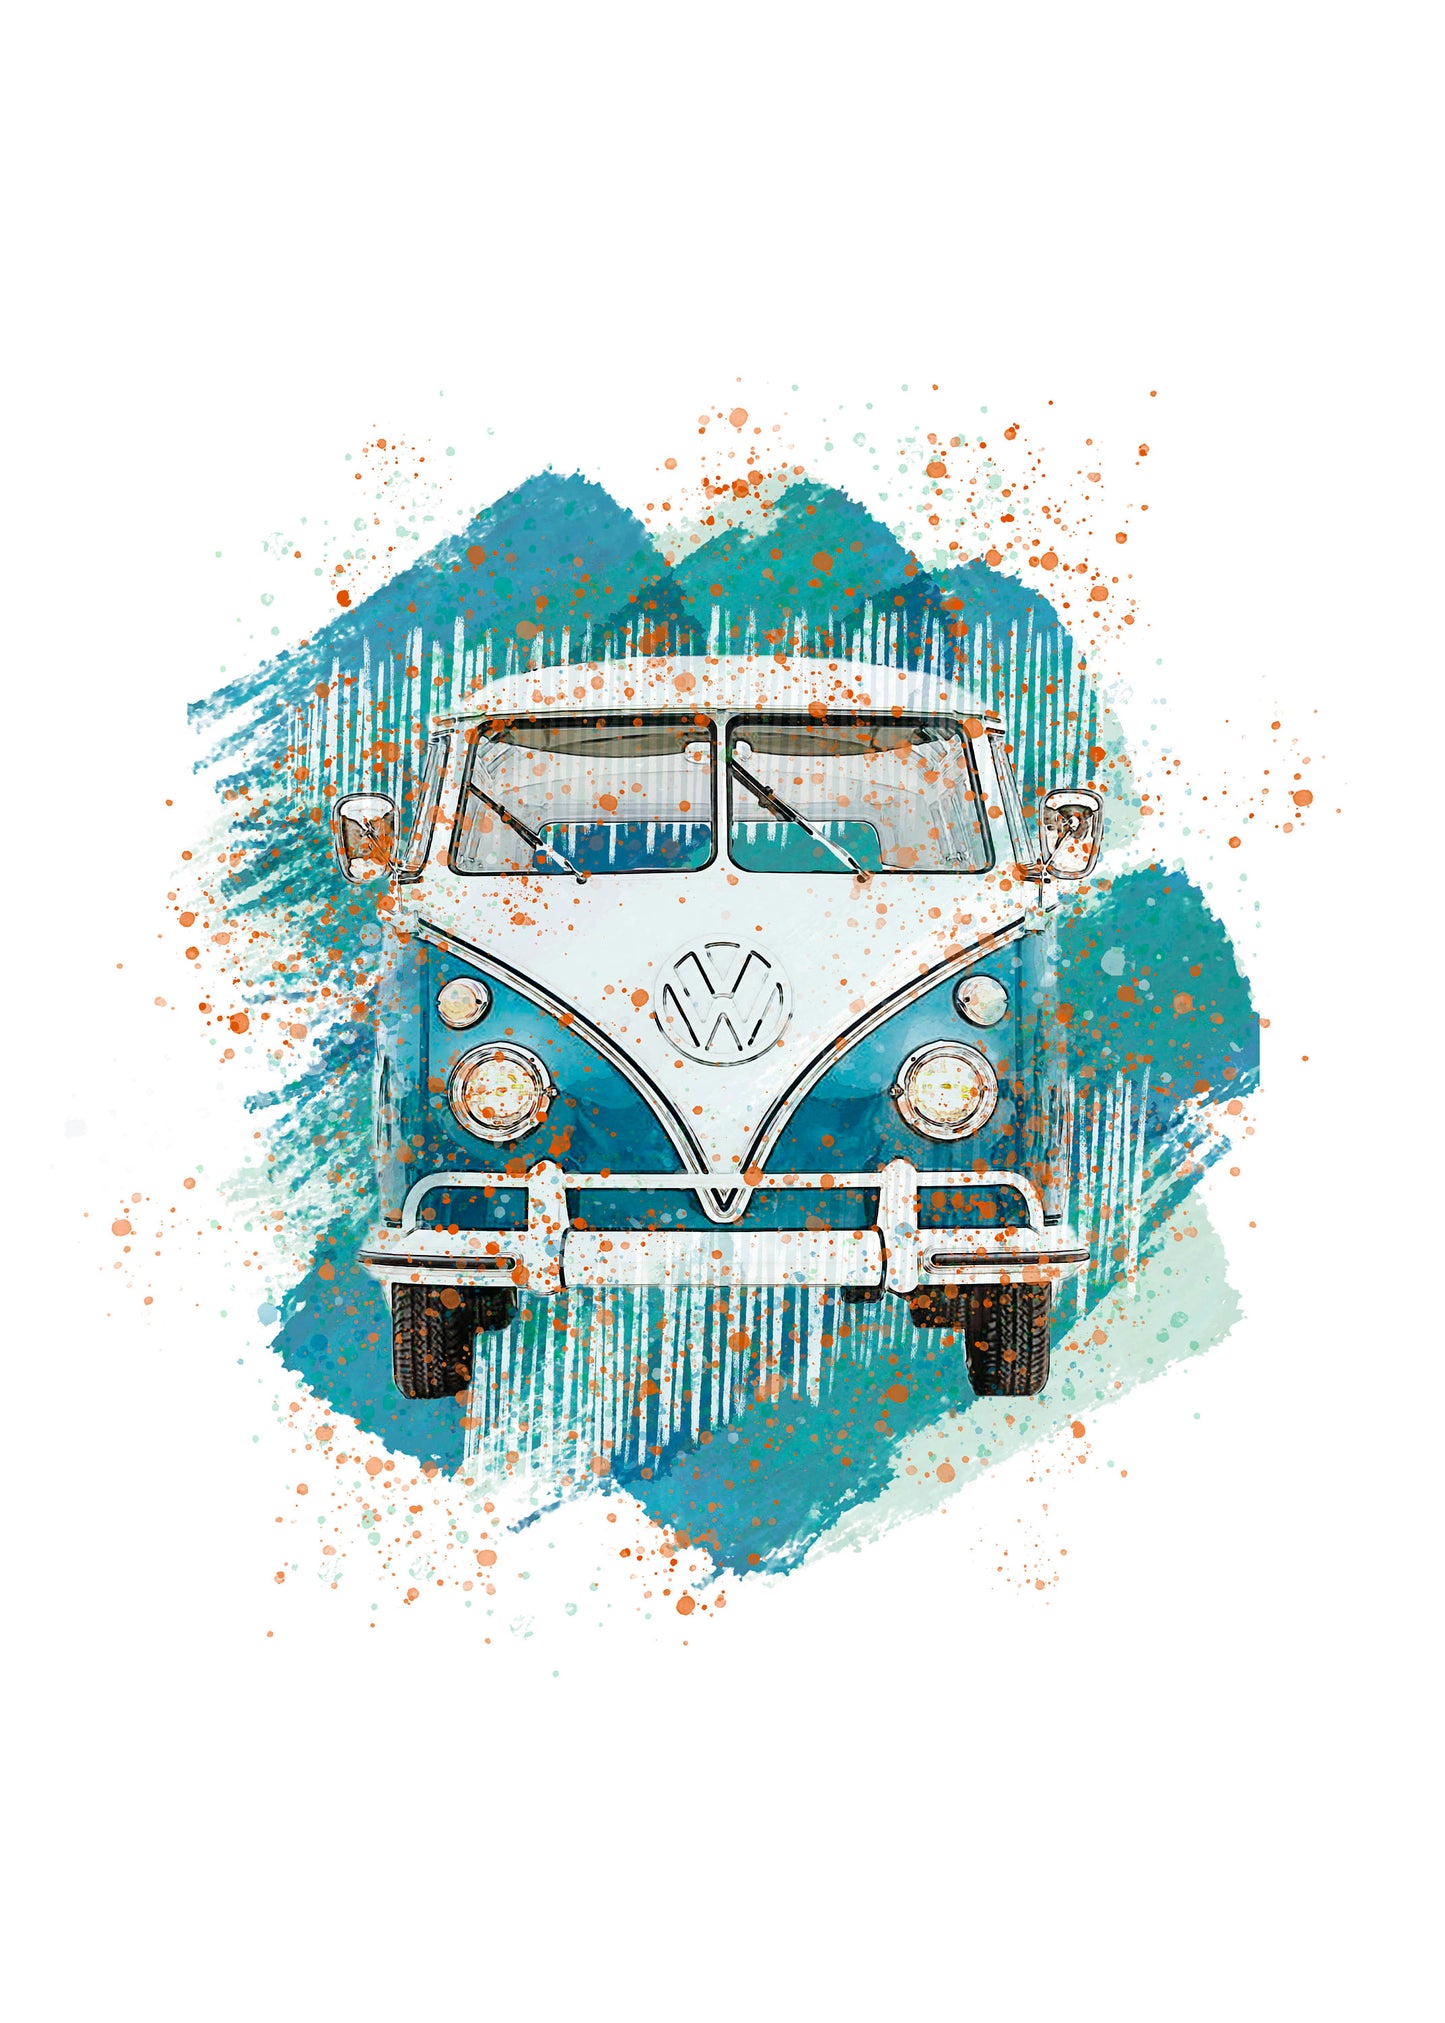 VW Campervan Art Print, with Paint Streaks and Spatter Background